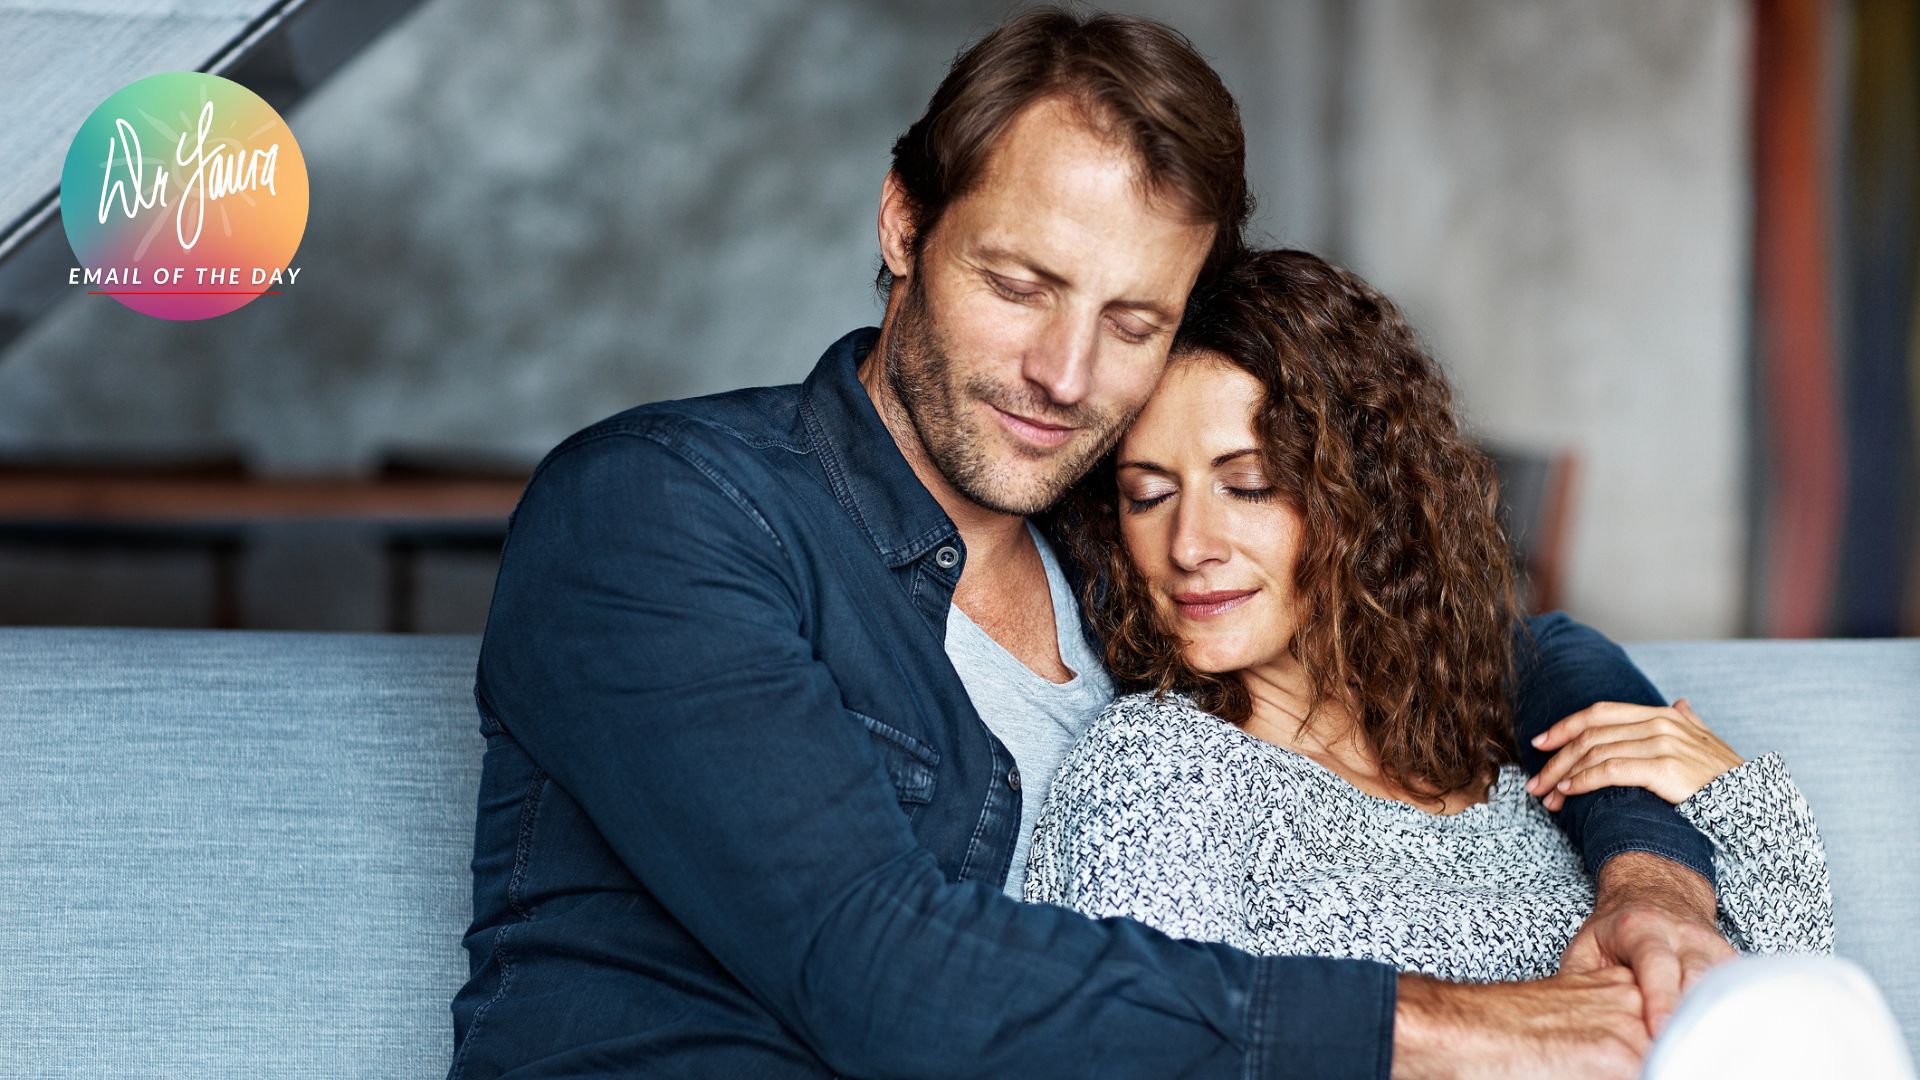 Man embraces woman around the shoulders, both with eyes closed and sitting on couch